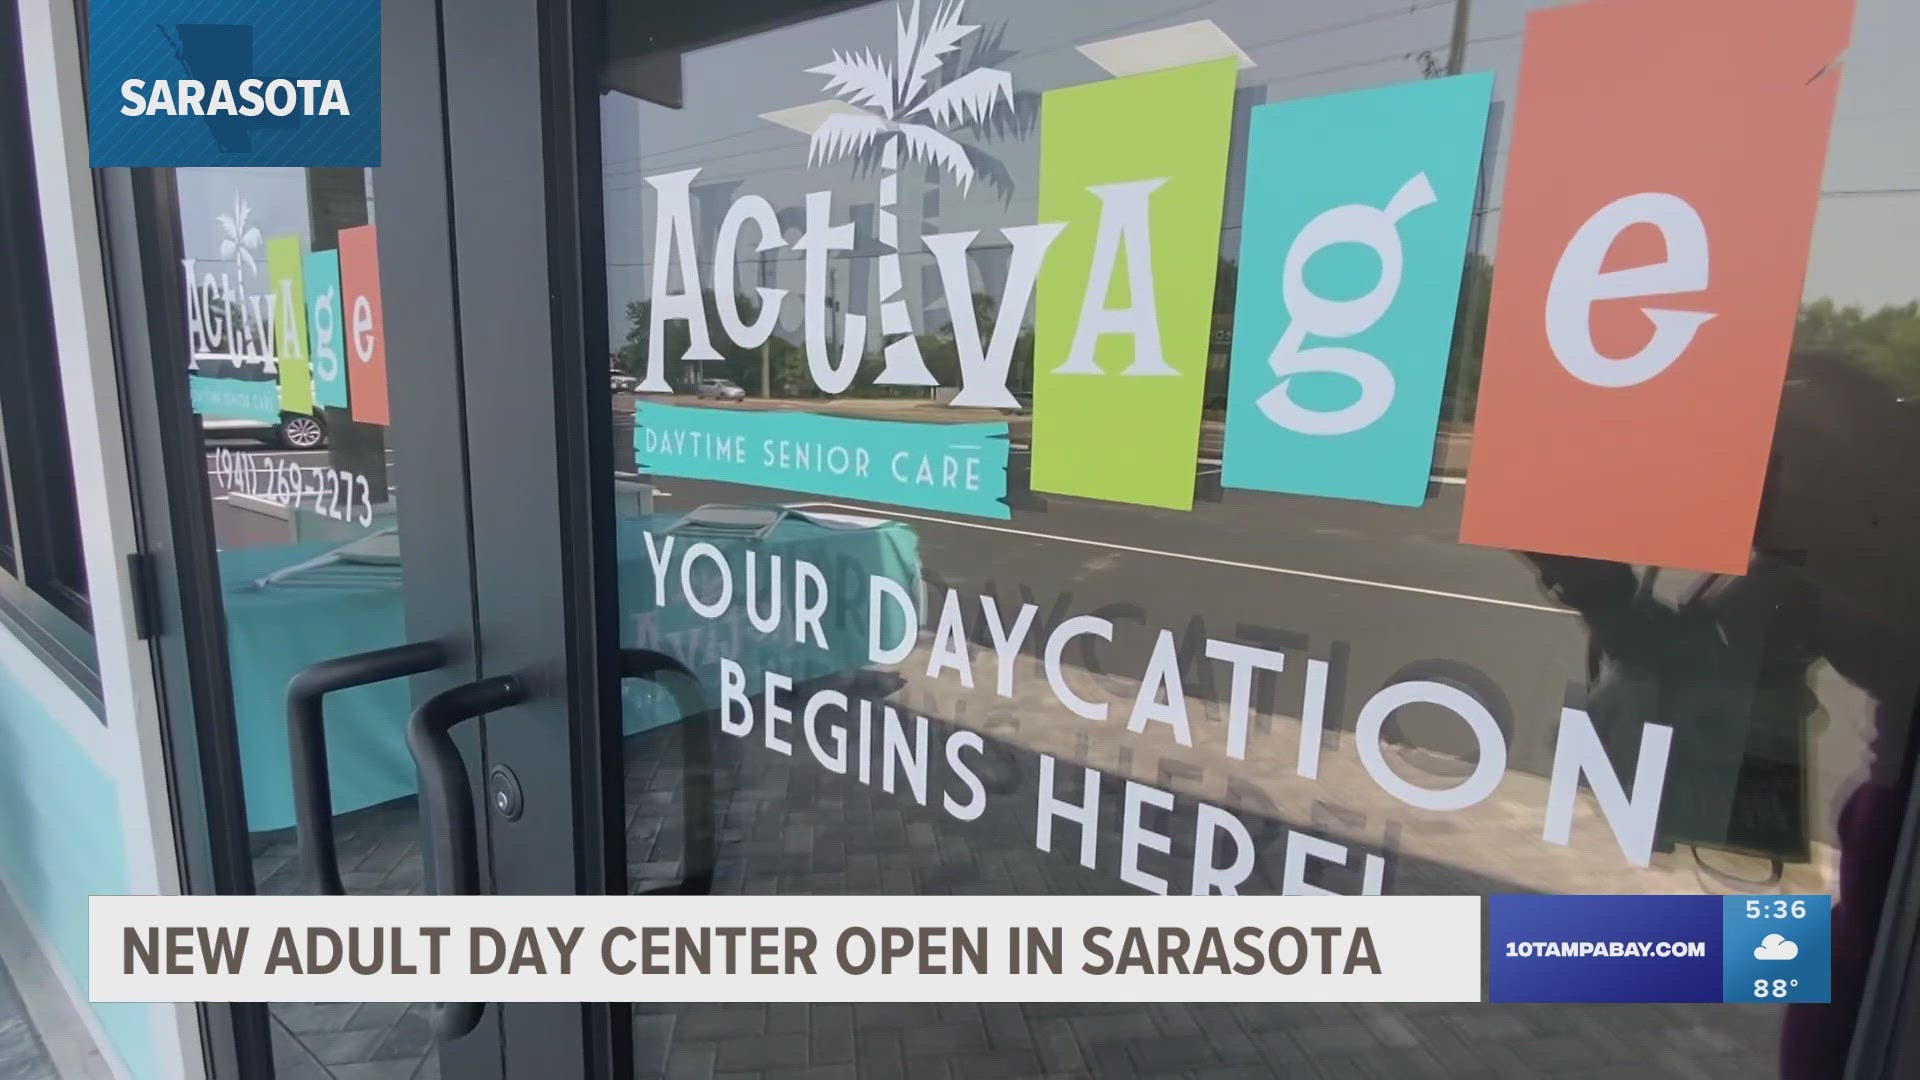 Activage Sarasota is the most recent themed center creating experiences for seniors.